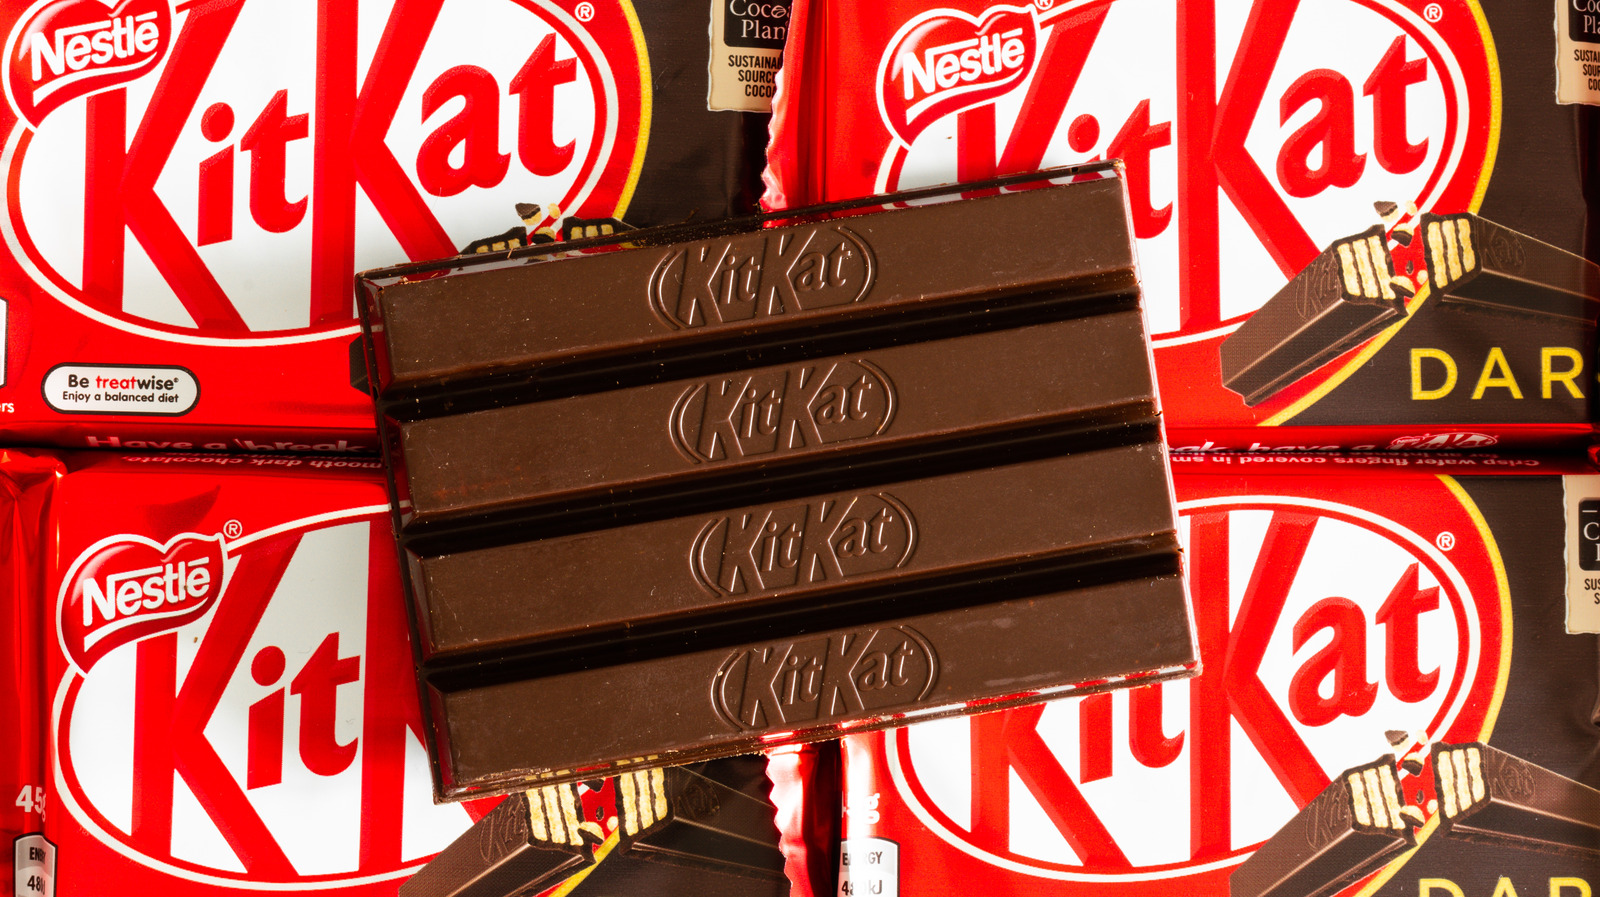 After Success In The UK, Vegan KitKats Are Coming To 15 Countries